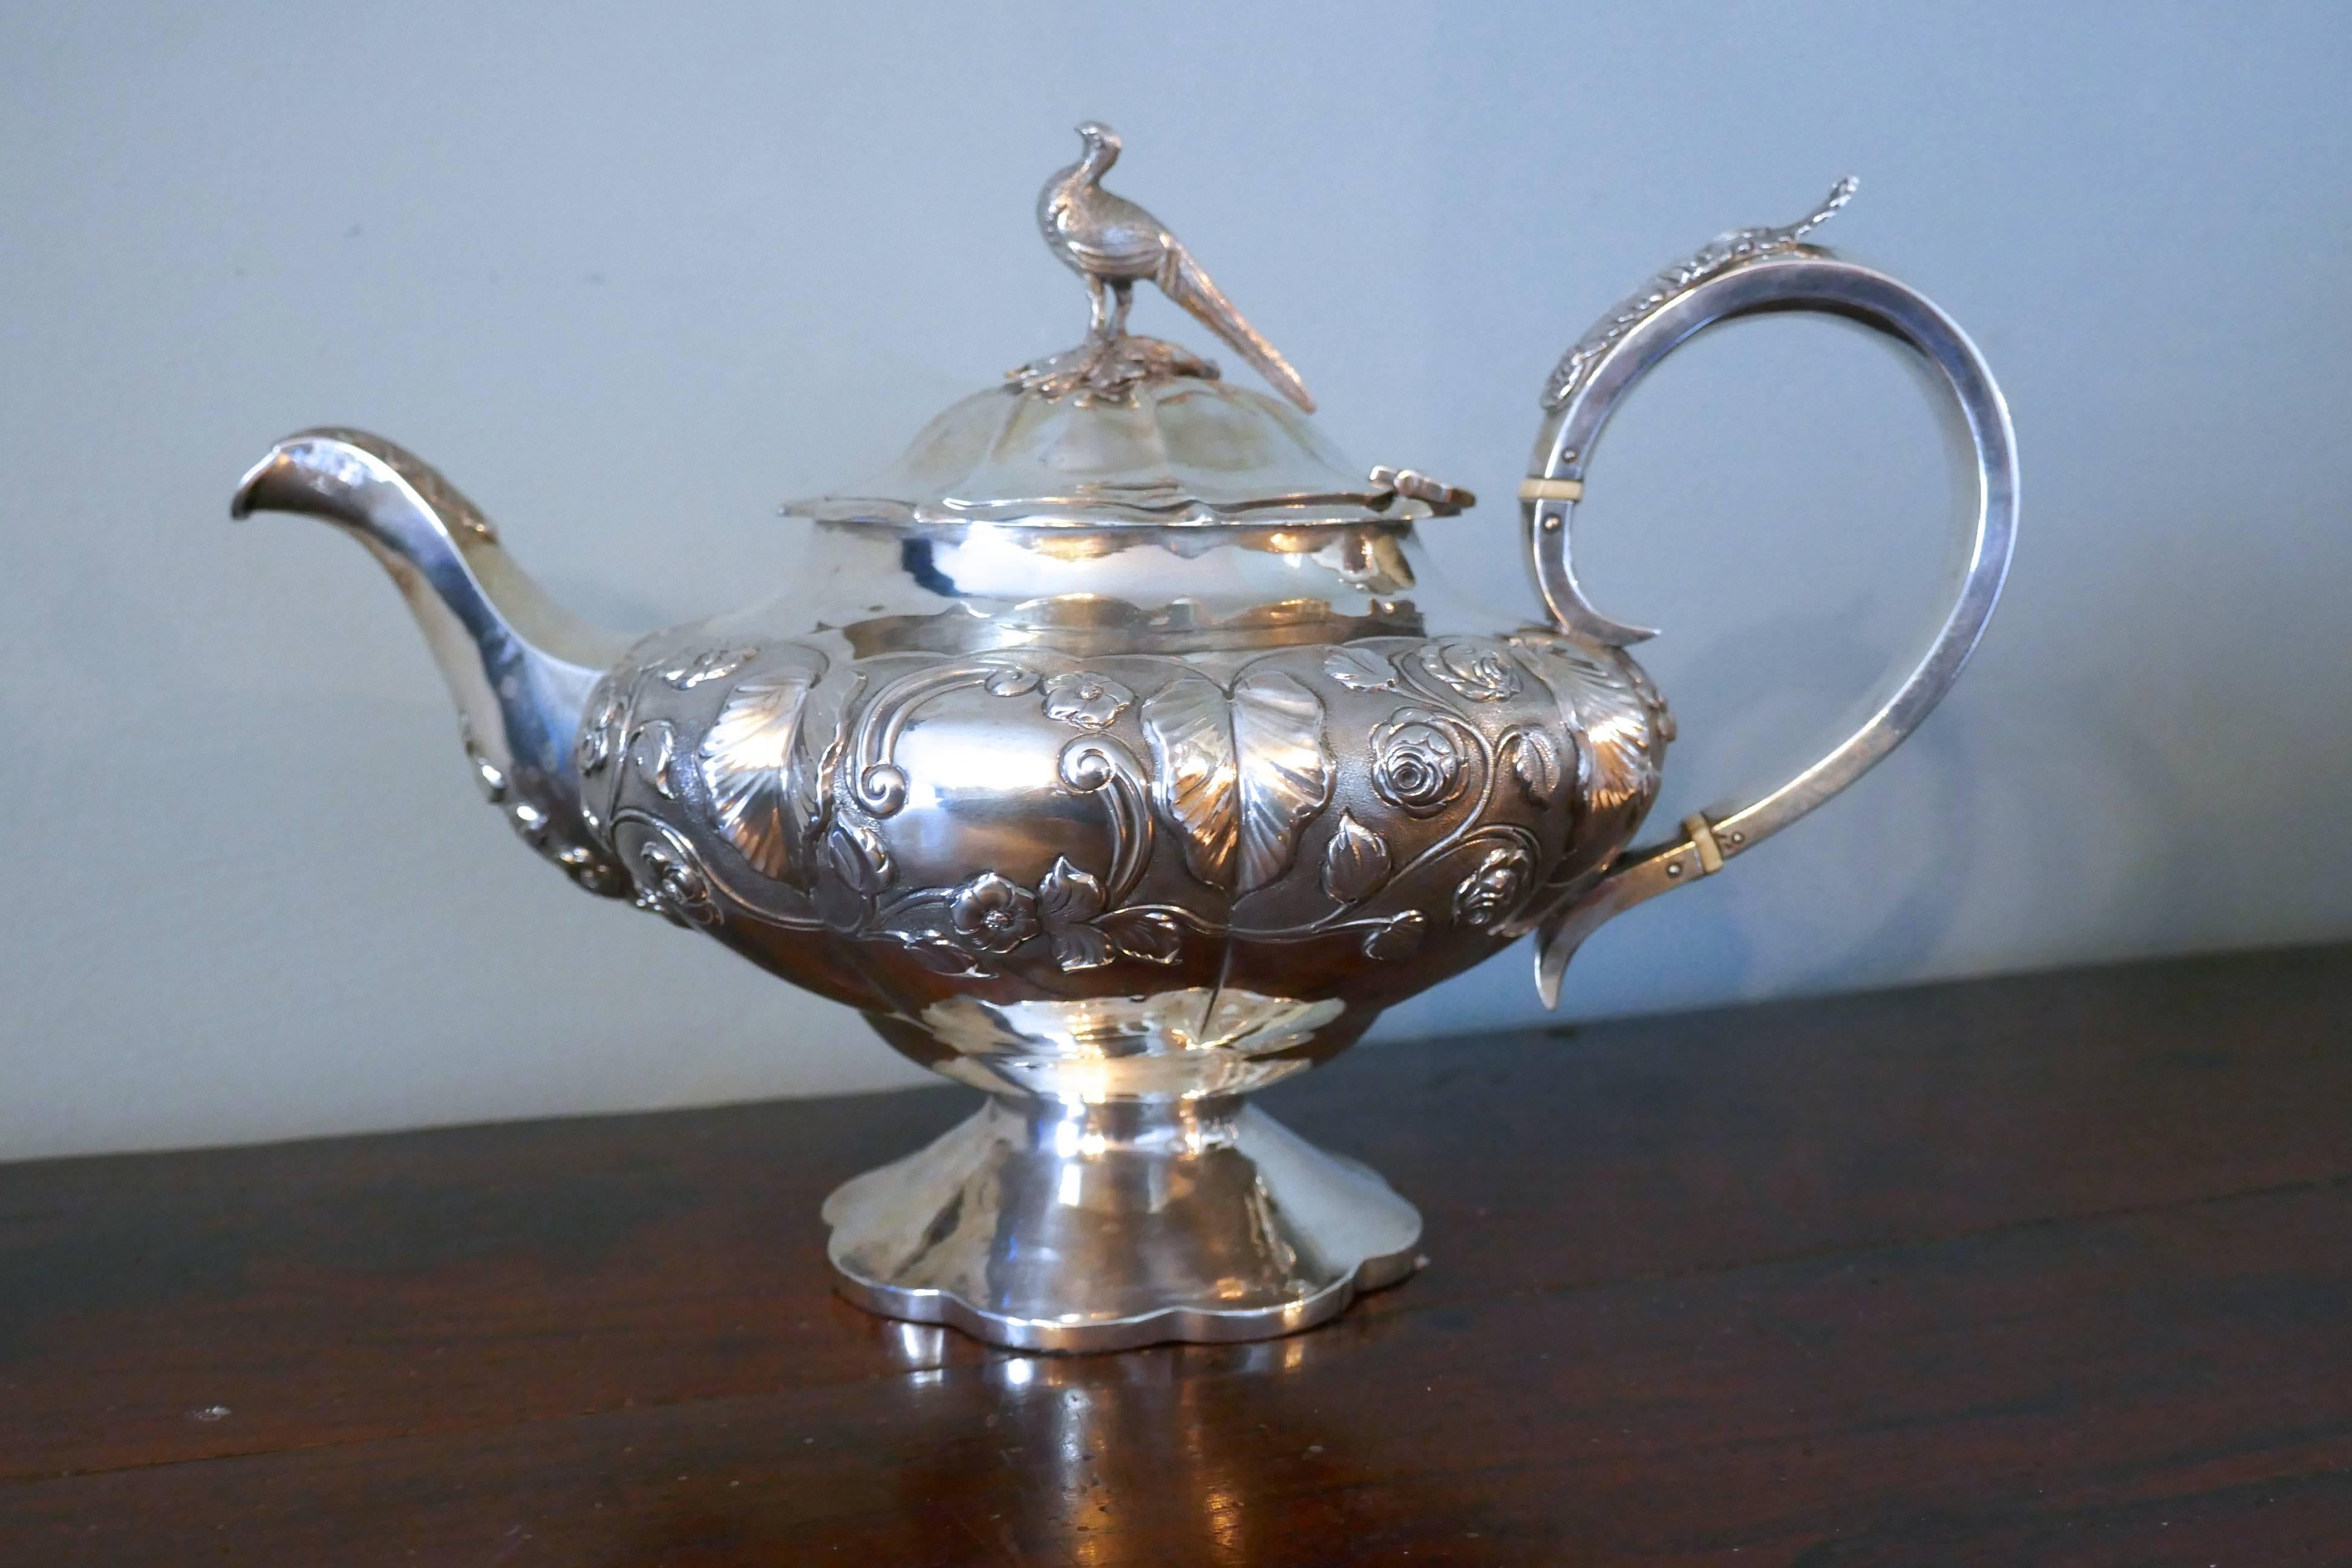 William IV silver four piece tea and coffee set by William Hewitt, London, 1836.

This pretty set is in very good condition with no damage or restoration. Each piece has a full set of clear and matching English silver hallmarks.
The silver melon